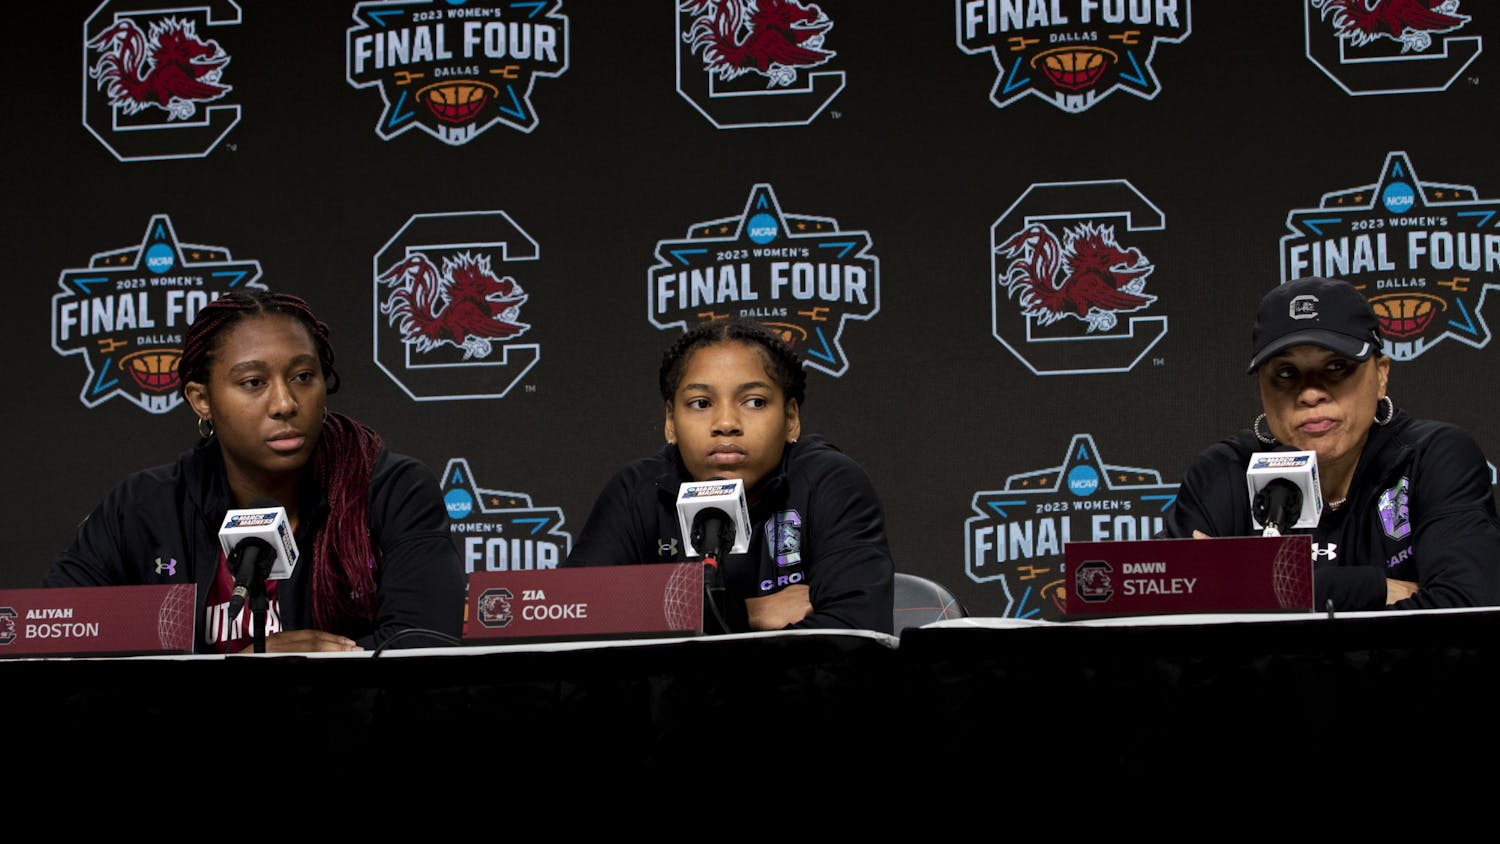 Senior guard Zia Cooke, senior forward Aliyah Boston and head coach Dawn Staley keep a stern composure while listening to the media's questions at the Women’s Final Four Pregame Press Conference on March 30, 2023, in Dallas, Texas. This is Staley’s third consecutive year leading the Gamecocks to the Final Four.&nbsp;